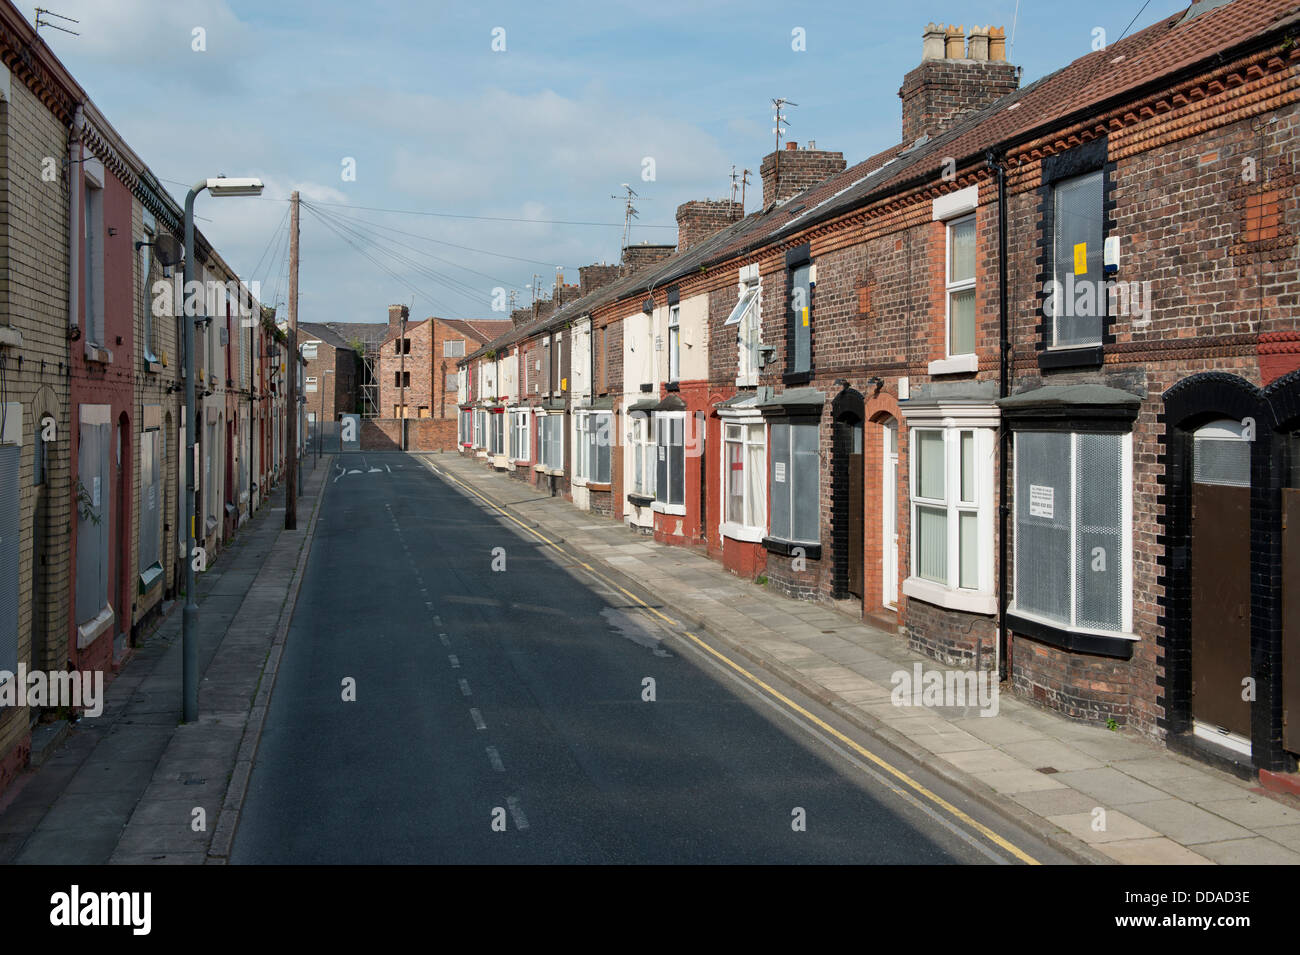 A shot of Bagnall Street in the Anfield area of Liverpool, where many condemned houses await demolition (Editorial use only). Stock Photo